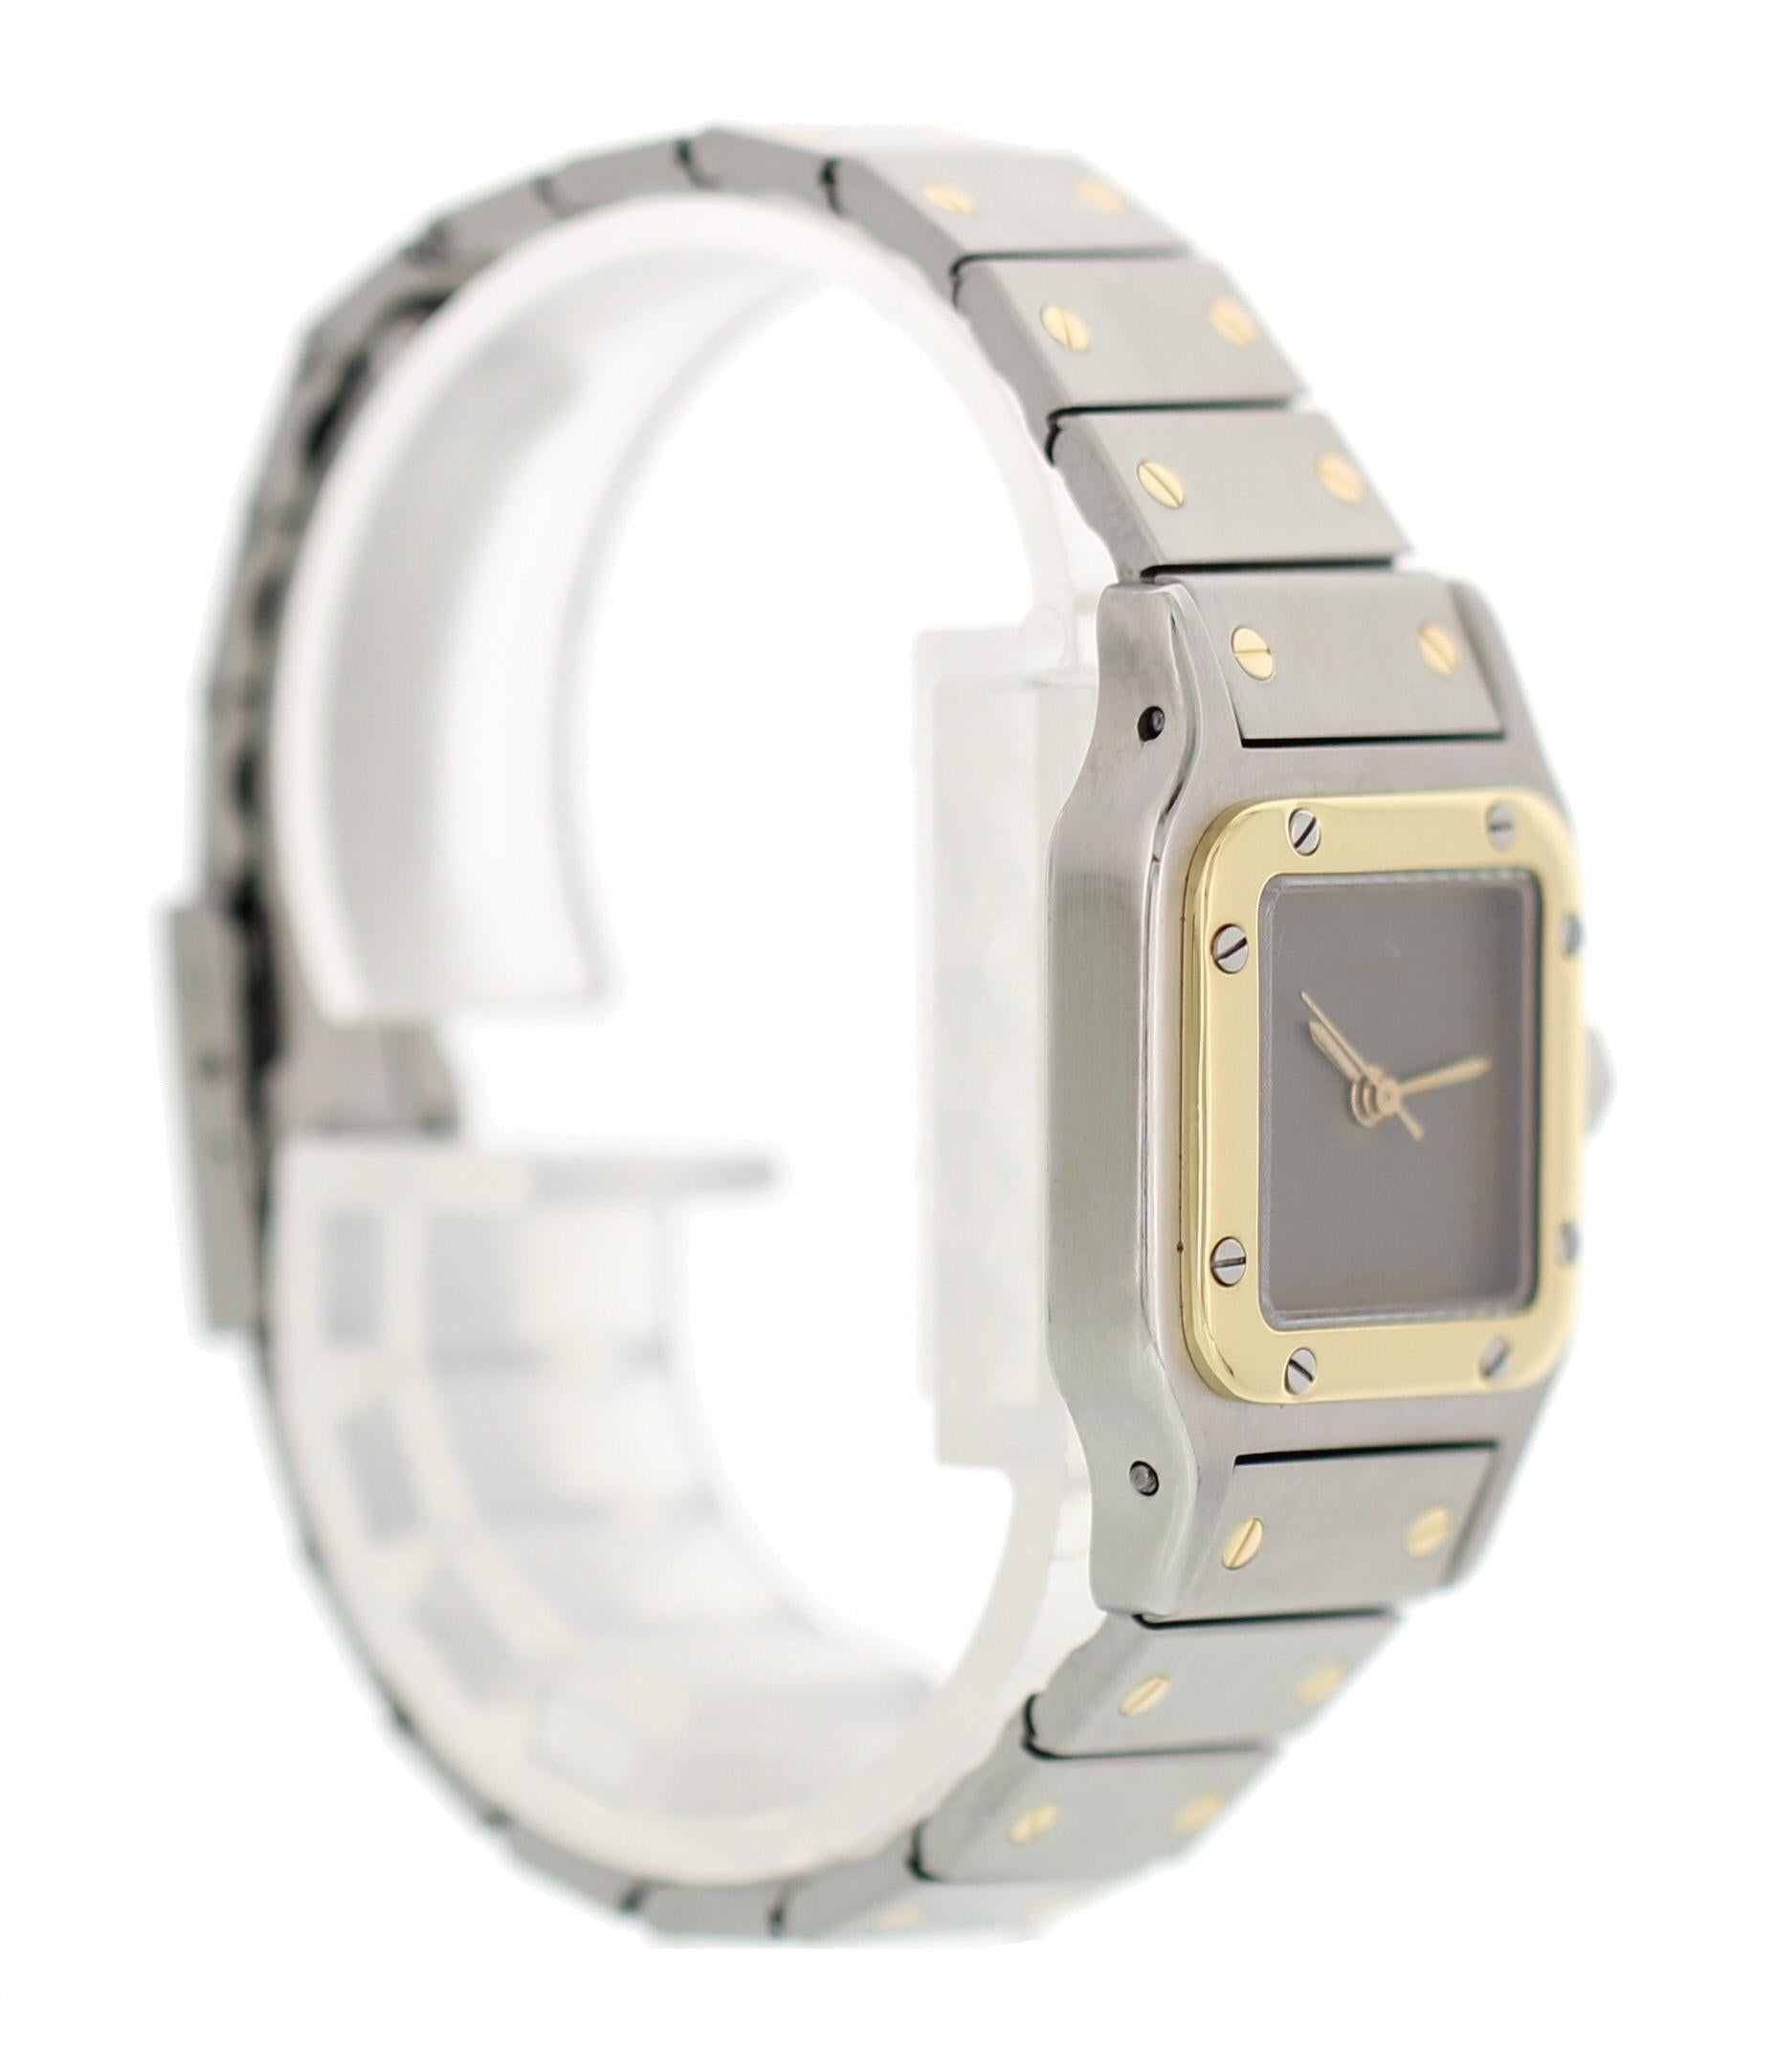 Cartier Santos Galbee. Stainless steel 24 mm case. 18K yellow gold bezel. Gray dial with gold hands. 18K yellow gold and stainless steel band with a steel hidden butterfly clasp. Will fit up to a 5.5 inch wrist. Water resistant. Automatic movement.